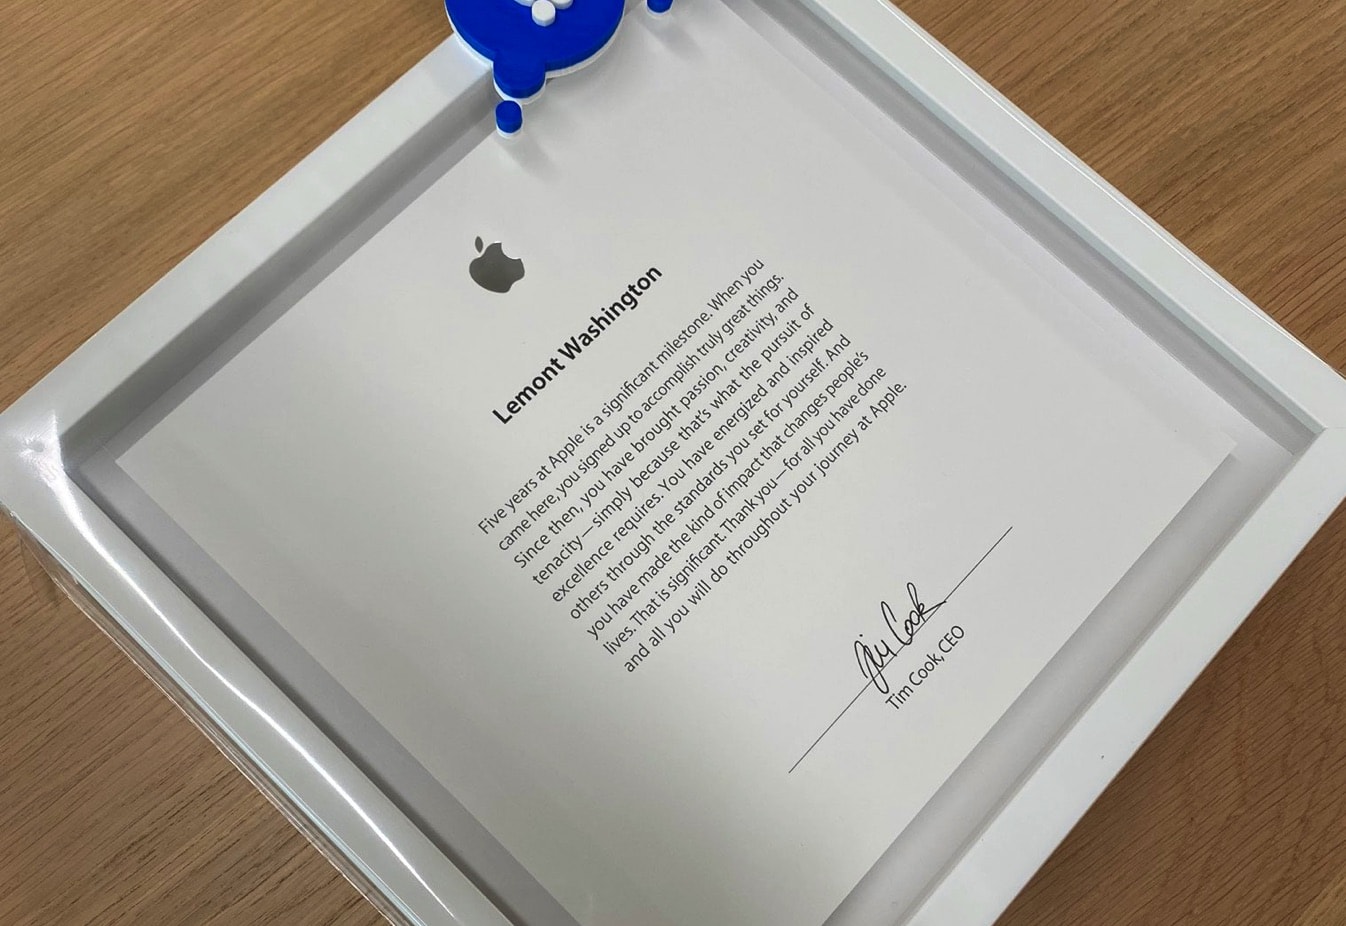 Here's what Tim Cook sends to Apple employees after 5 years of service